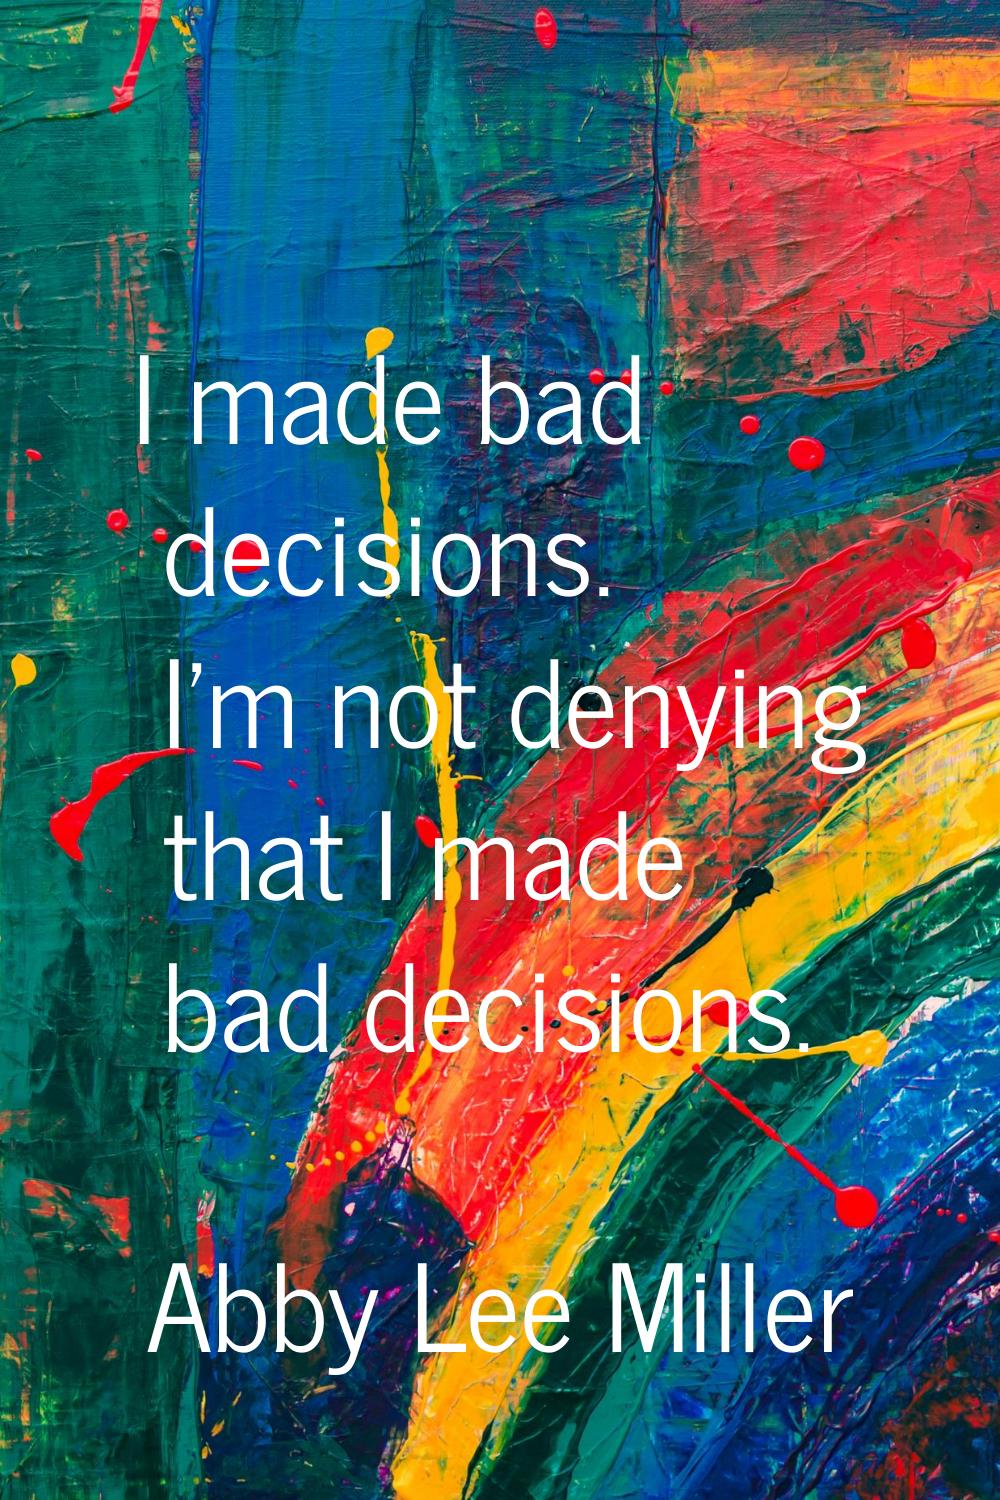 I made bad decisions. I'm not denying that I made bad decisions.